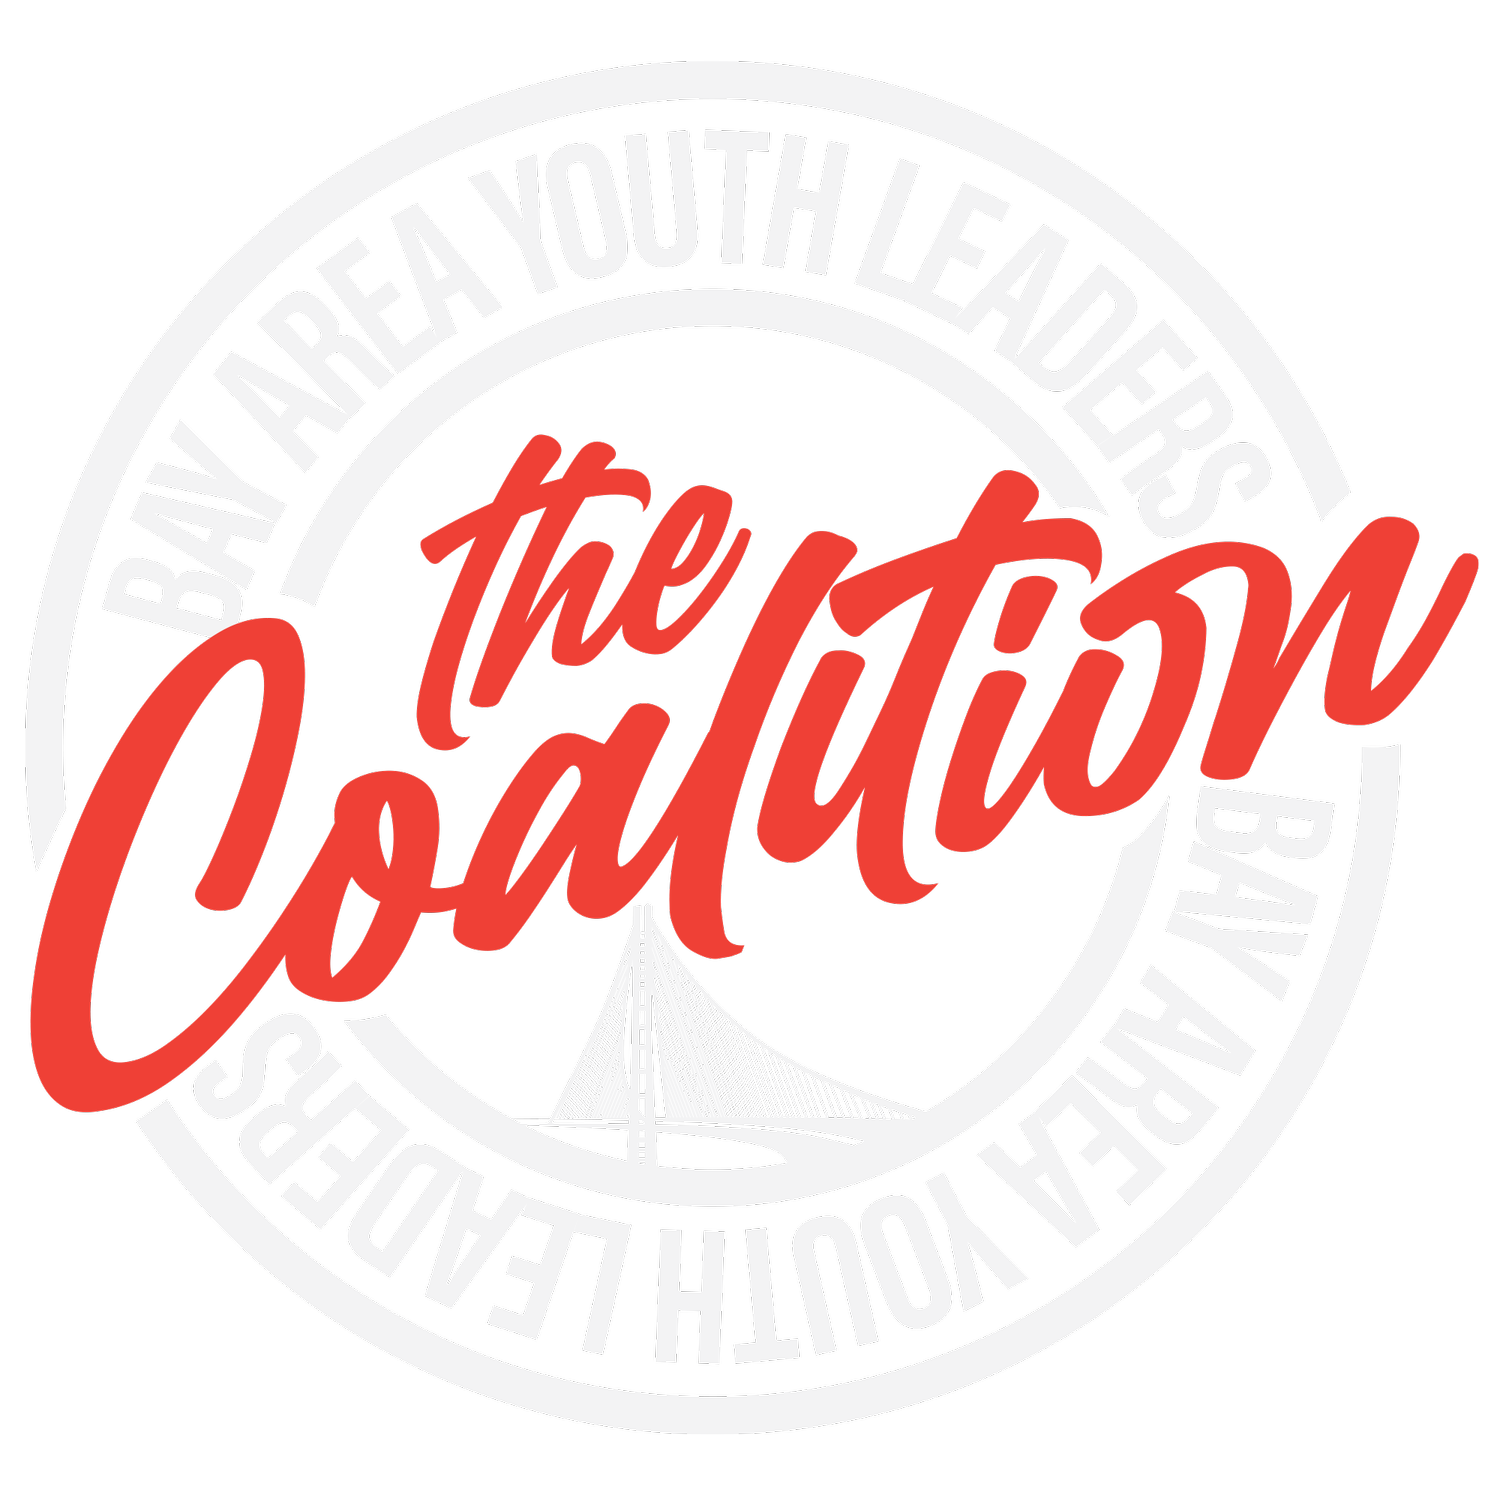 Bay Area Youth Leaders Coalition